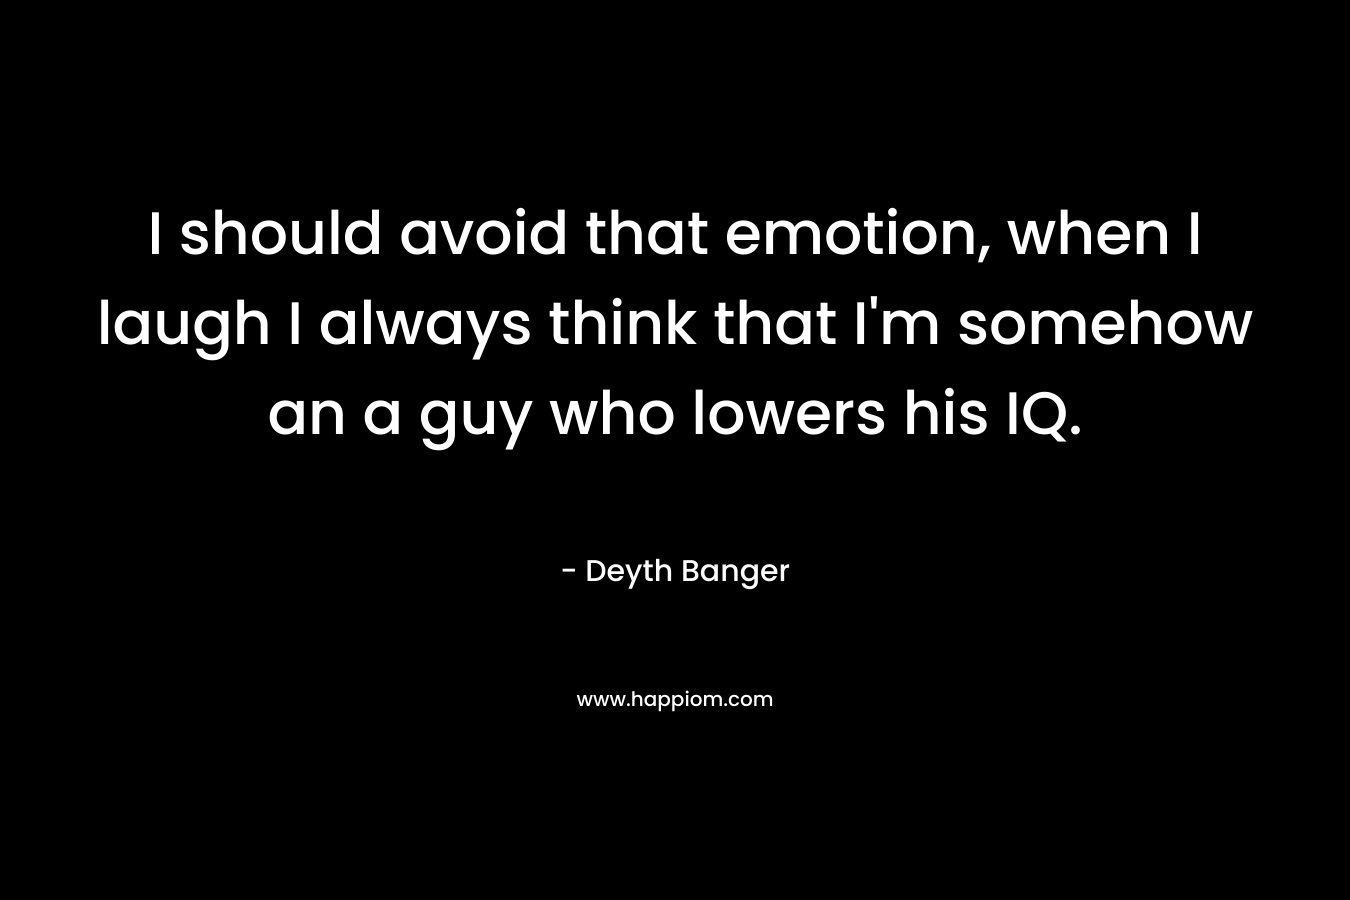 I should avoid that emotion, when I laugh I always think that I’m somehow an a guy who lowers his IQ. – Deyth Banger